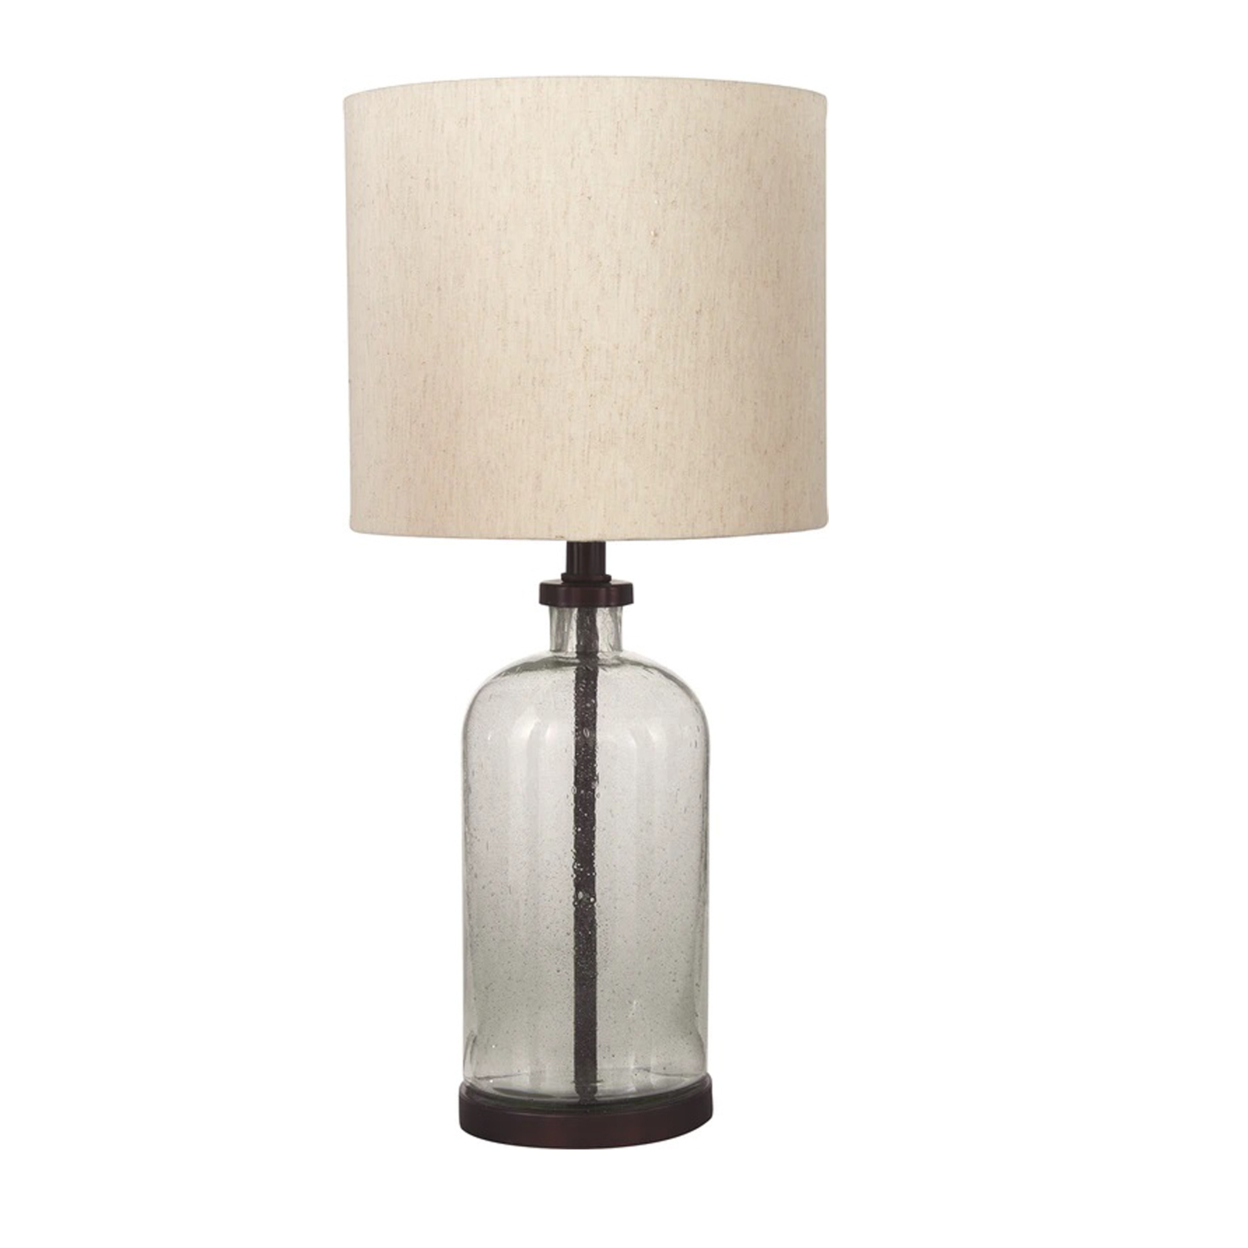 Cylindrical Seeded Glass Table Lamp With Fabric Drum Shade, Beige And Clear- Saltoro Sherpi